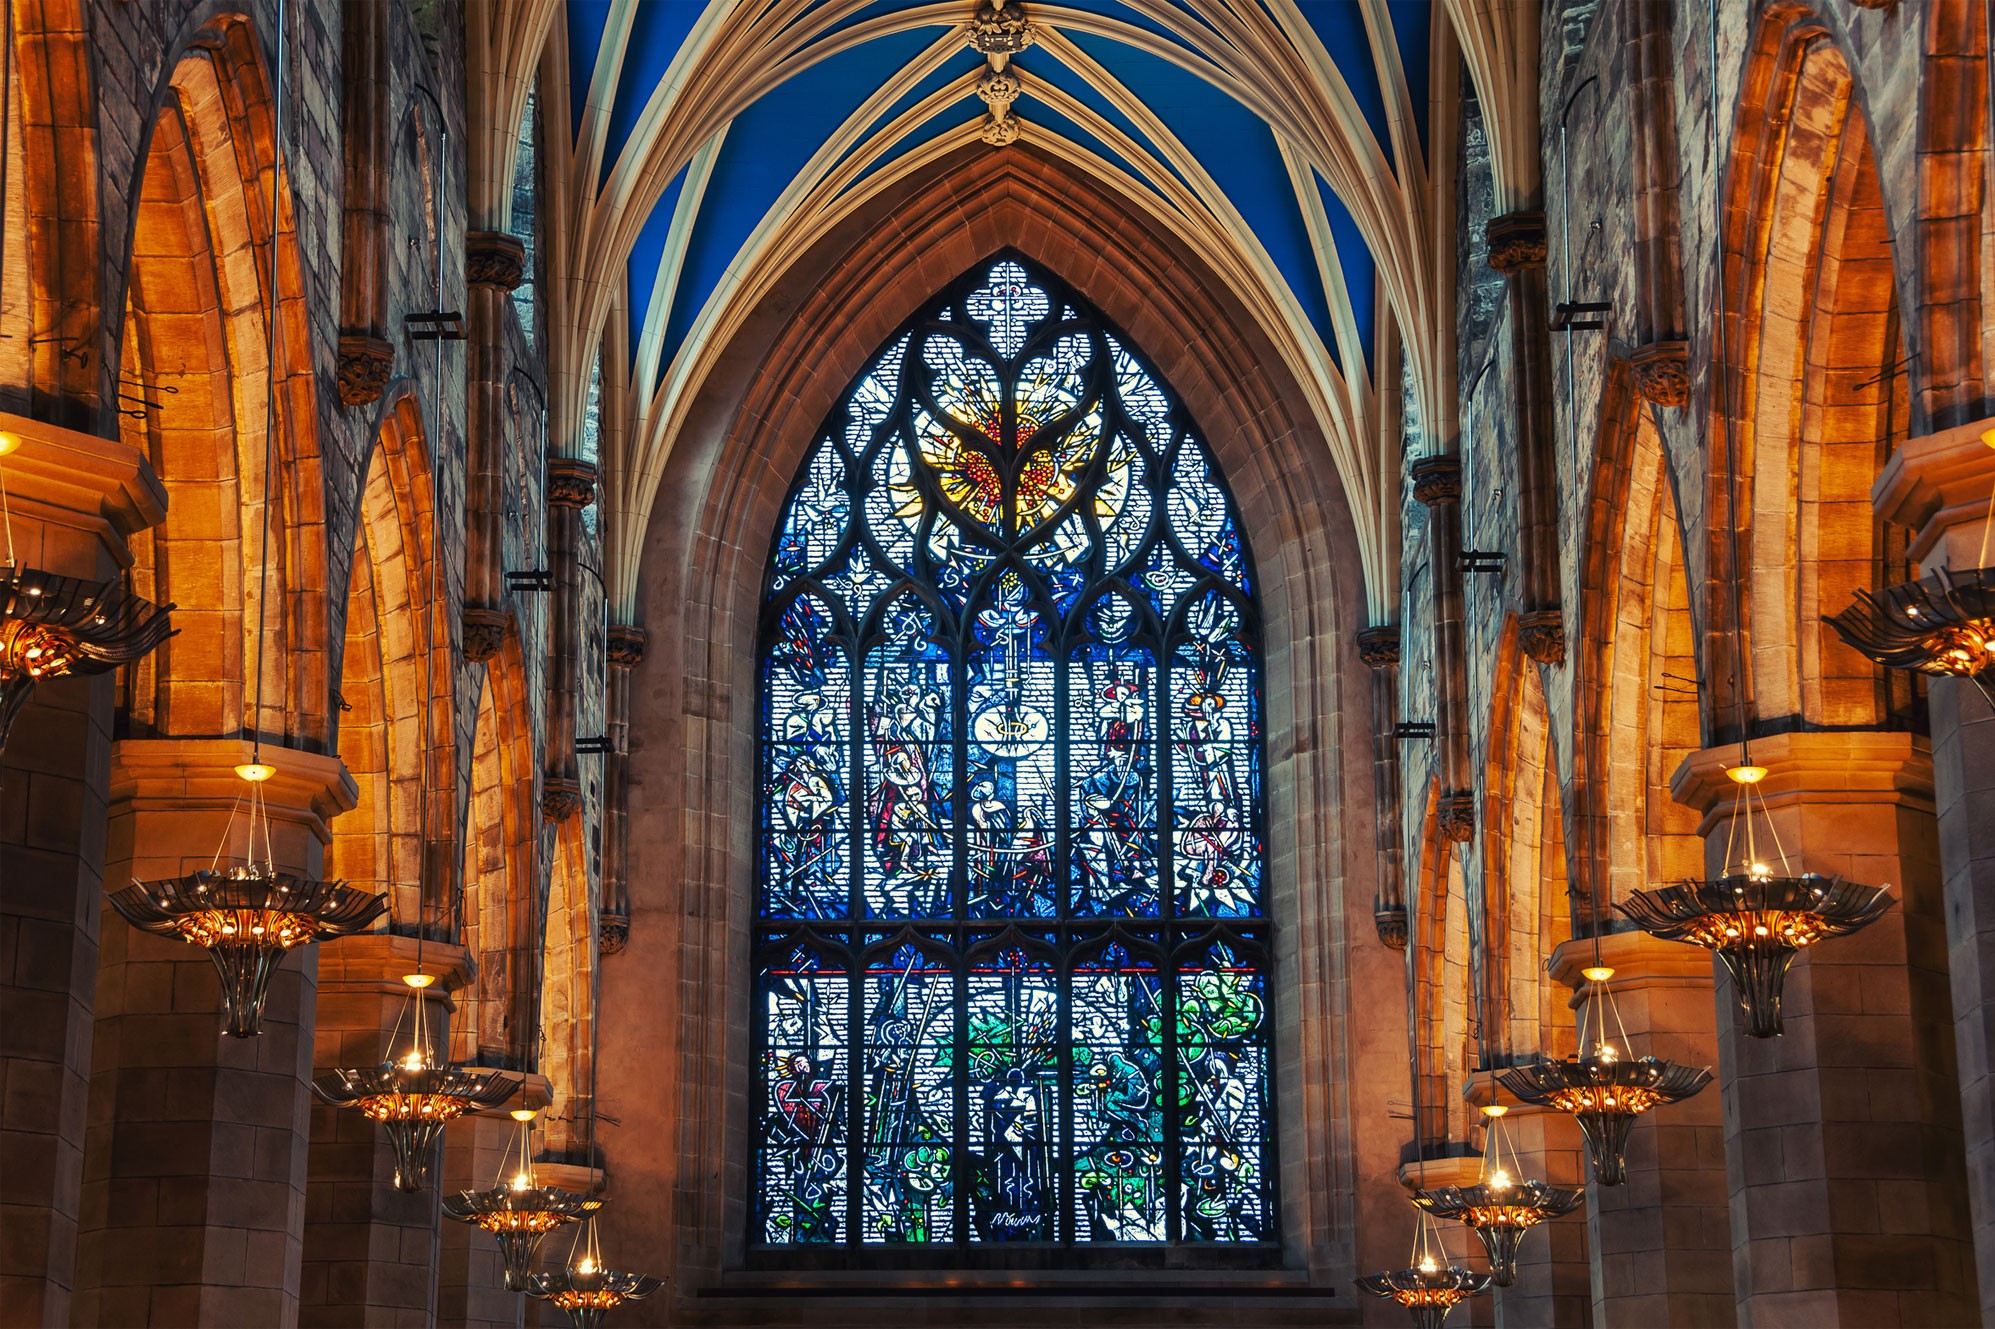 St. Giles’ Cathedral